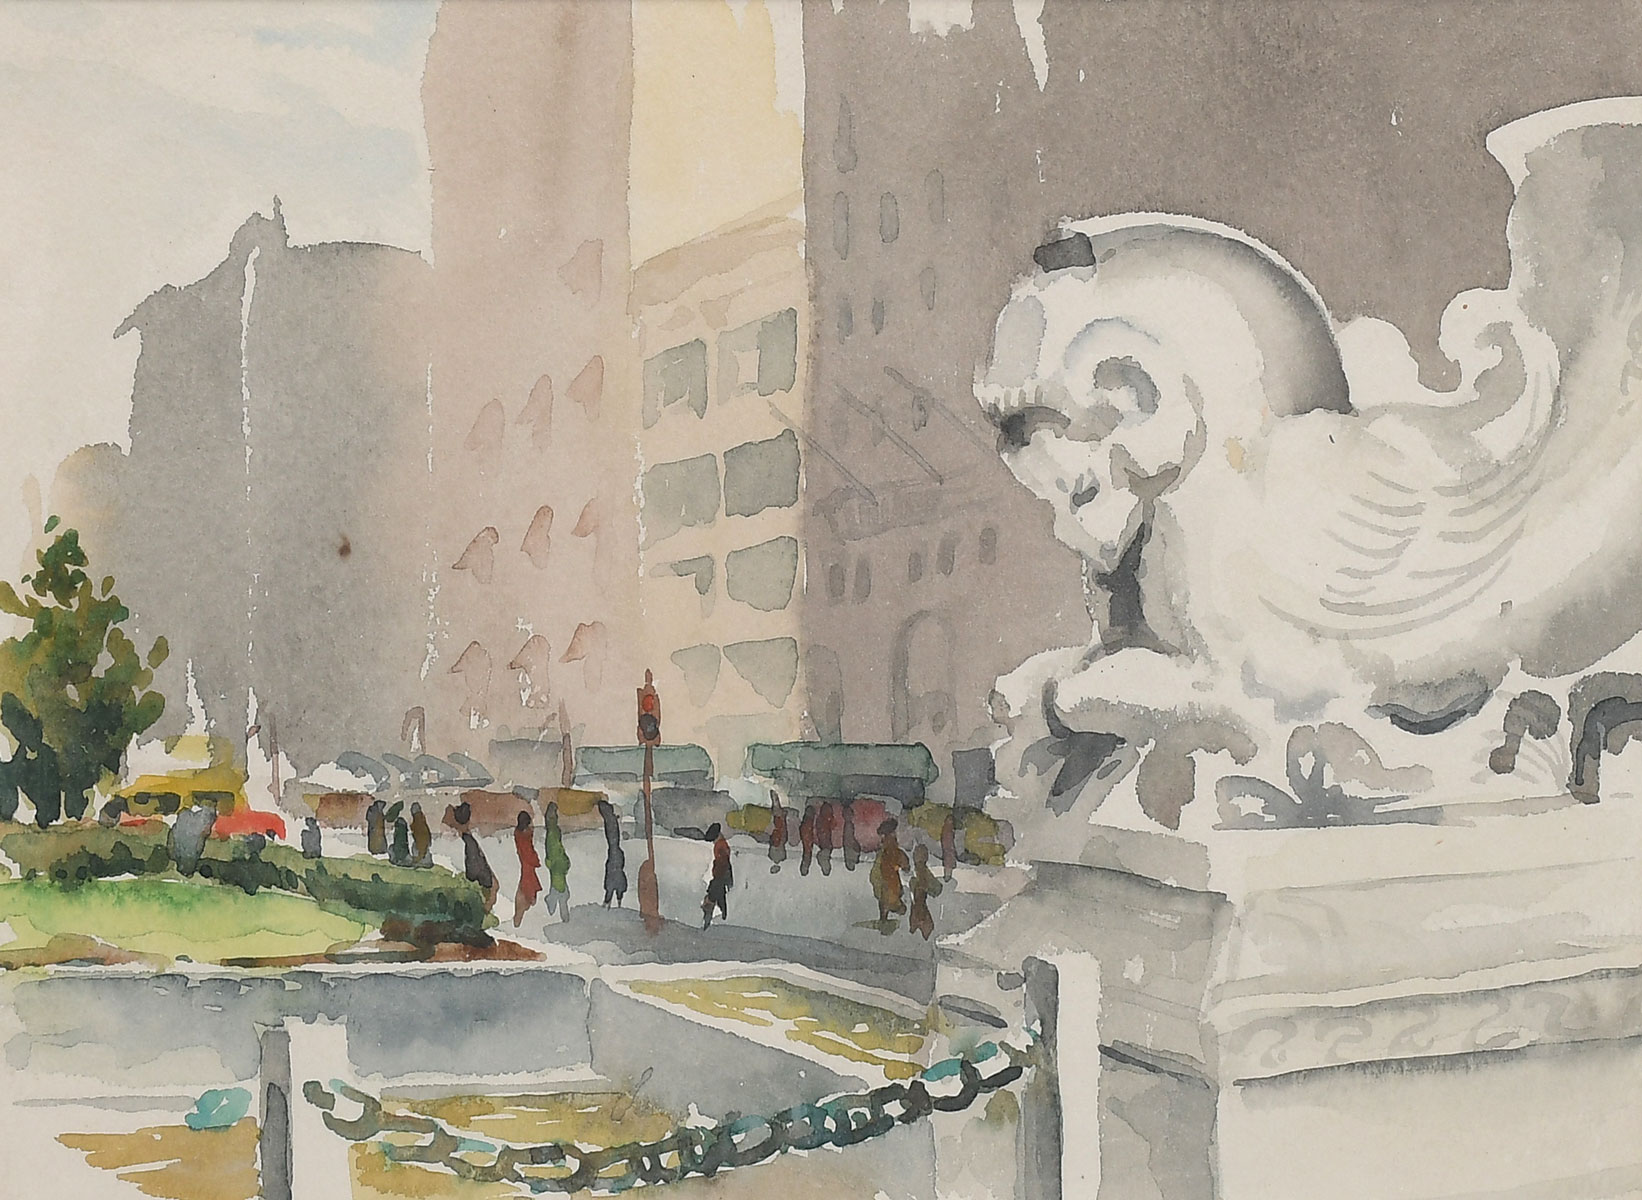 PLAZA HOTEL NYC PAINTING BY HENRY: